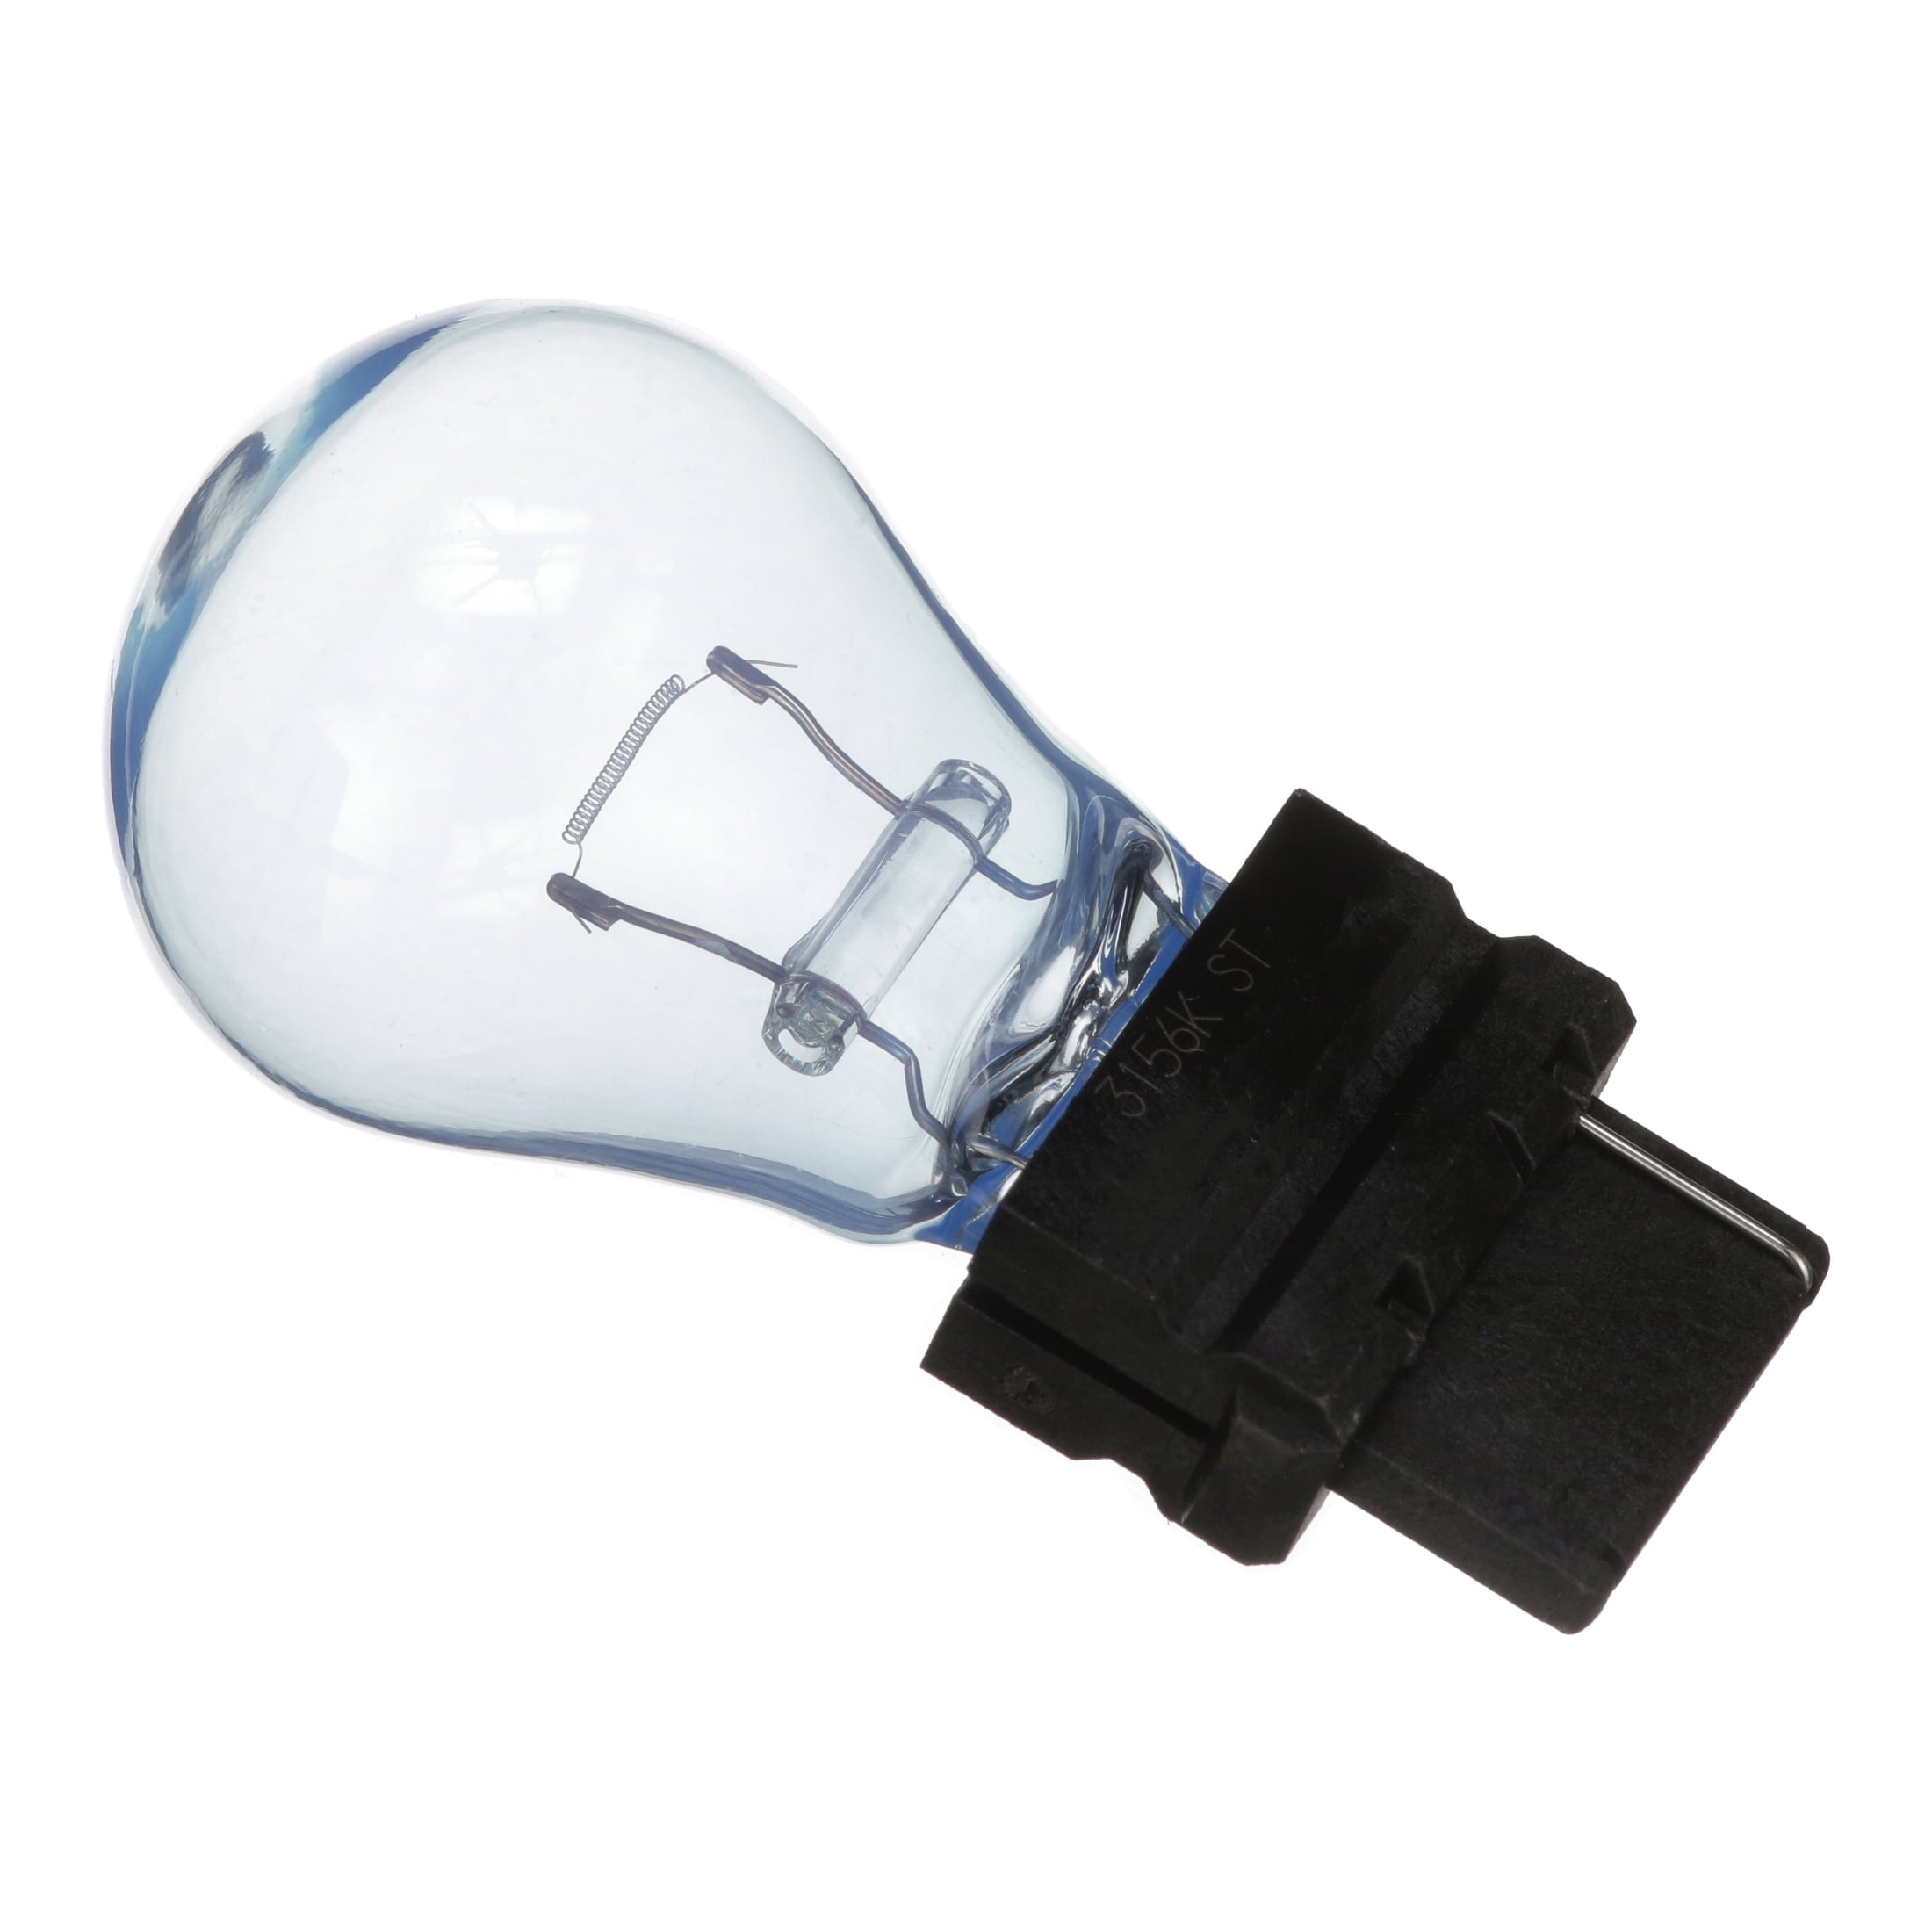 and Back-Up/Reverse Lights 3156 SilverStar Mini Bulb Contains 2 Bulbs Ideal for Daytime Running Lights SYLVANIA DRL Brighter and Whiter Light 